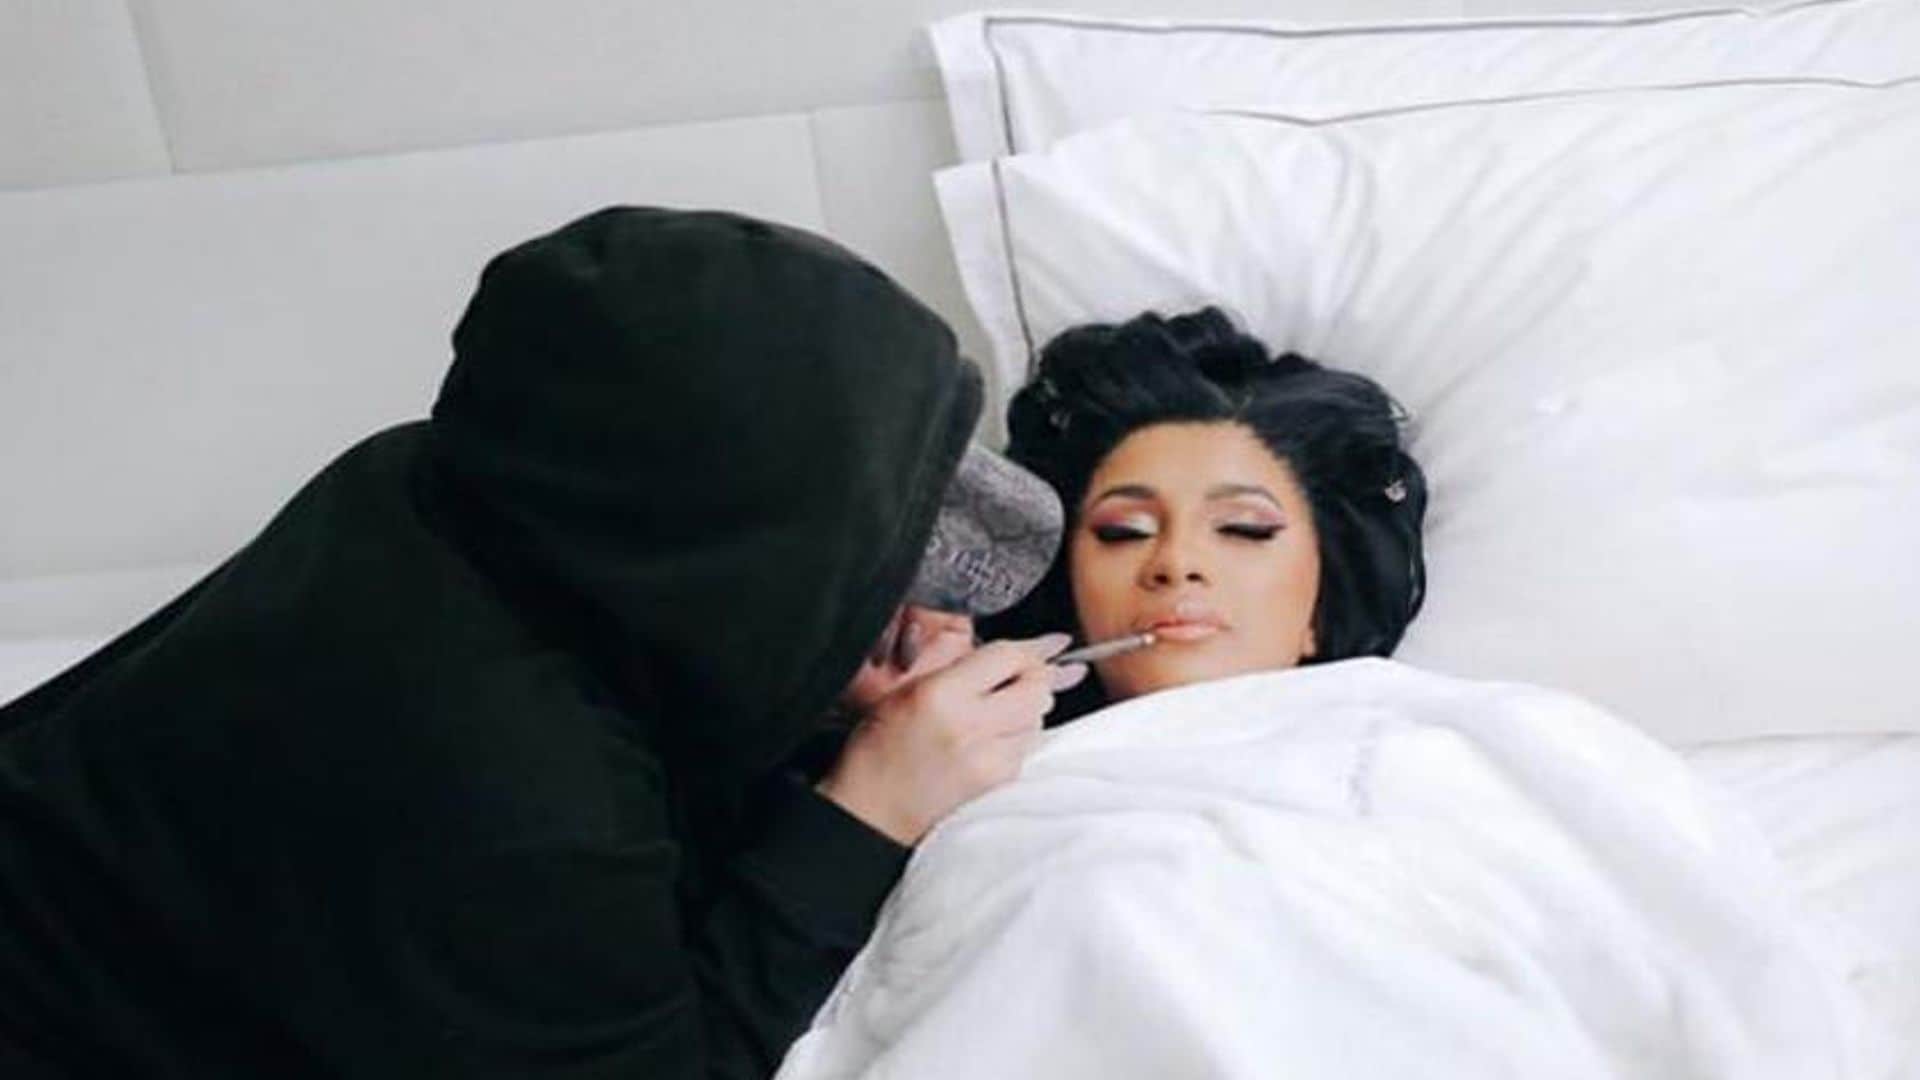 The internet is losing it over Cardi B getting her makeup done while sleeping